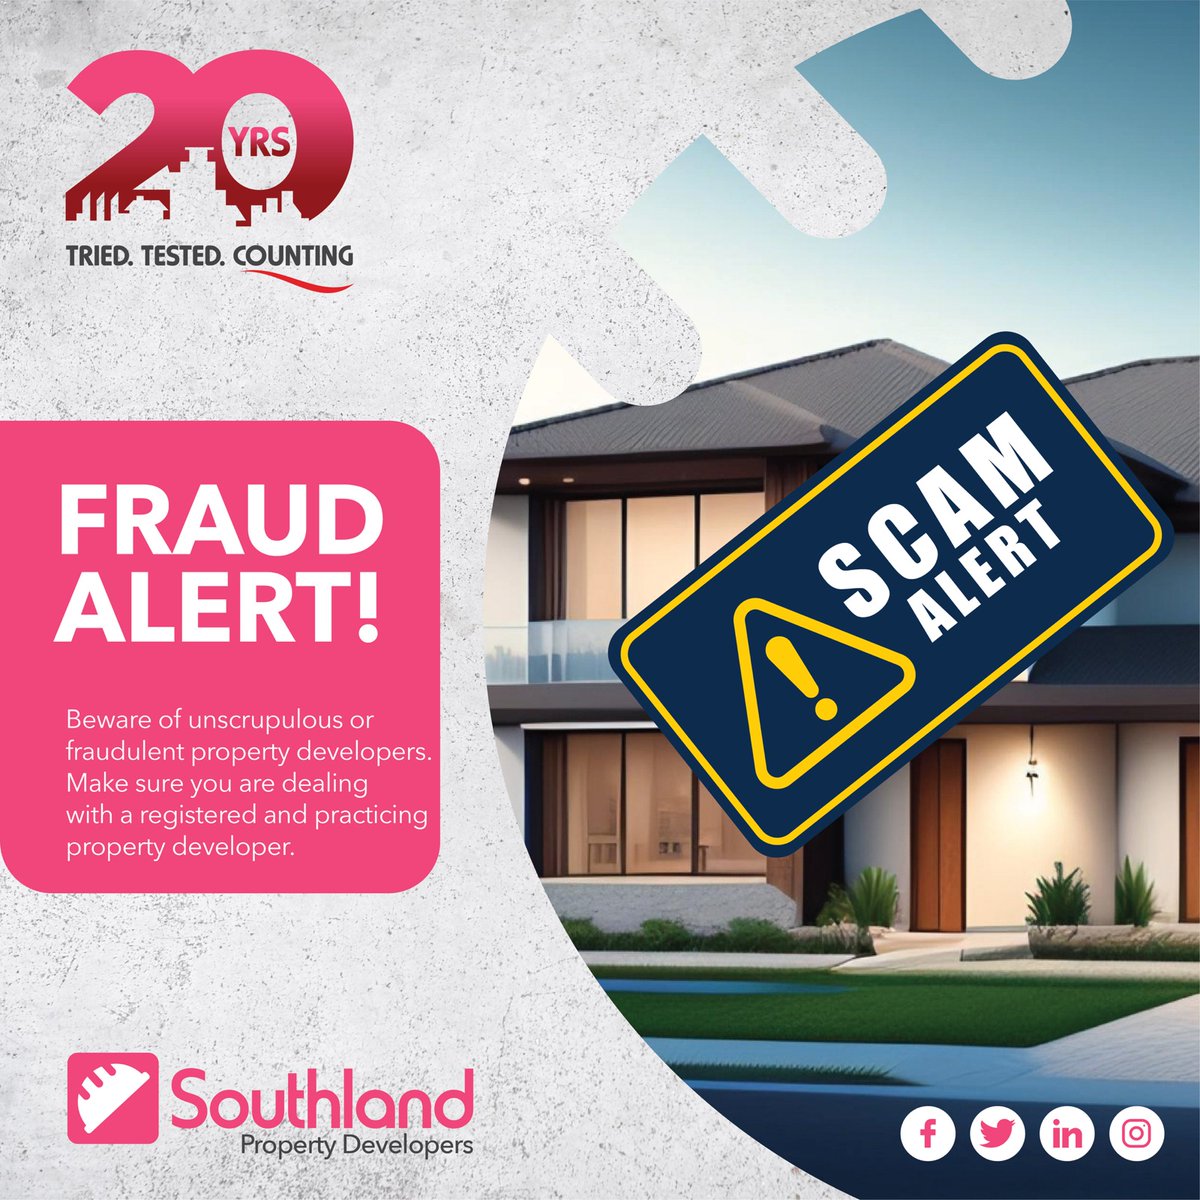 How can you tell when a property deal looks suspicious? Share your experience with us by replying to this thread. Your information may #HelpSomeone.
#ScamAlert #PropertyFraud